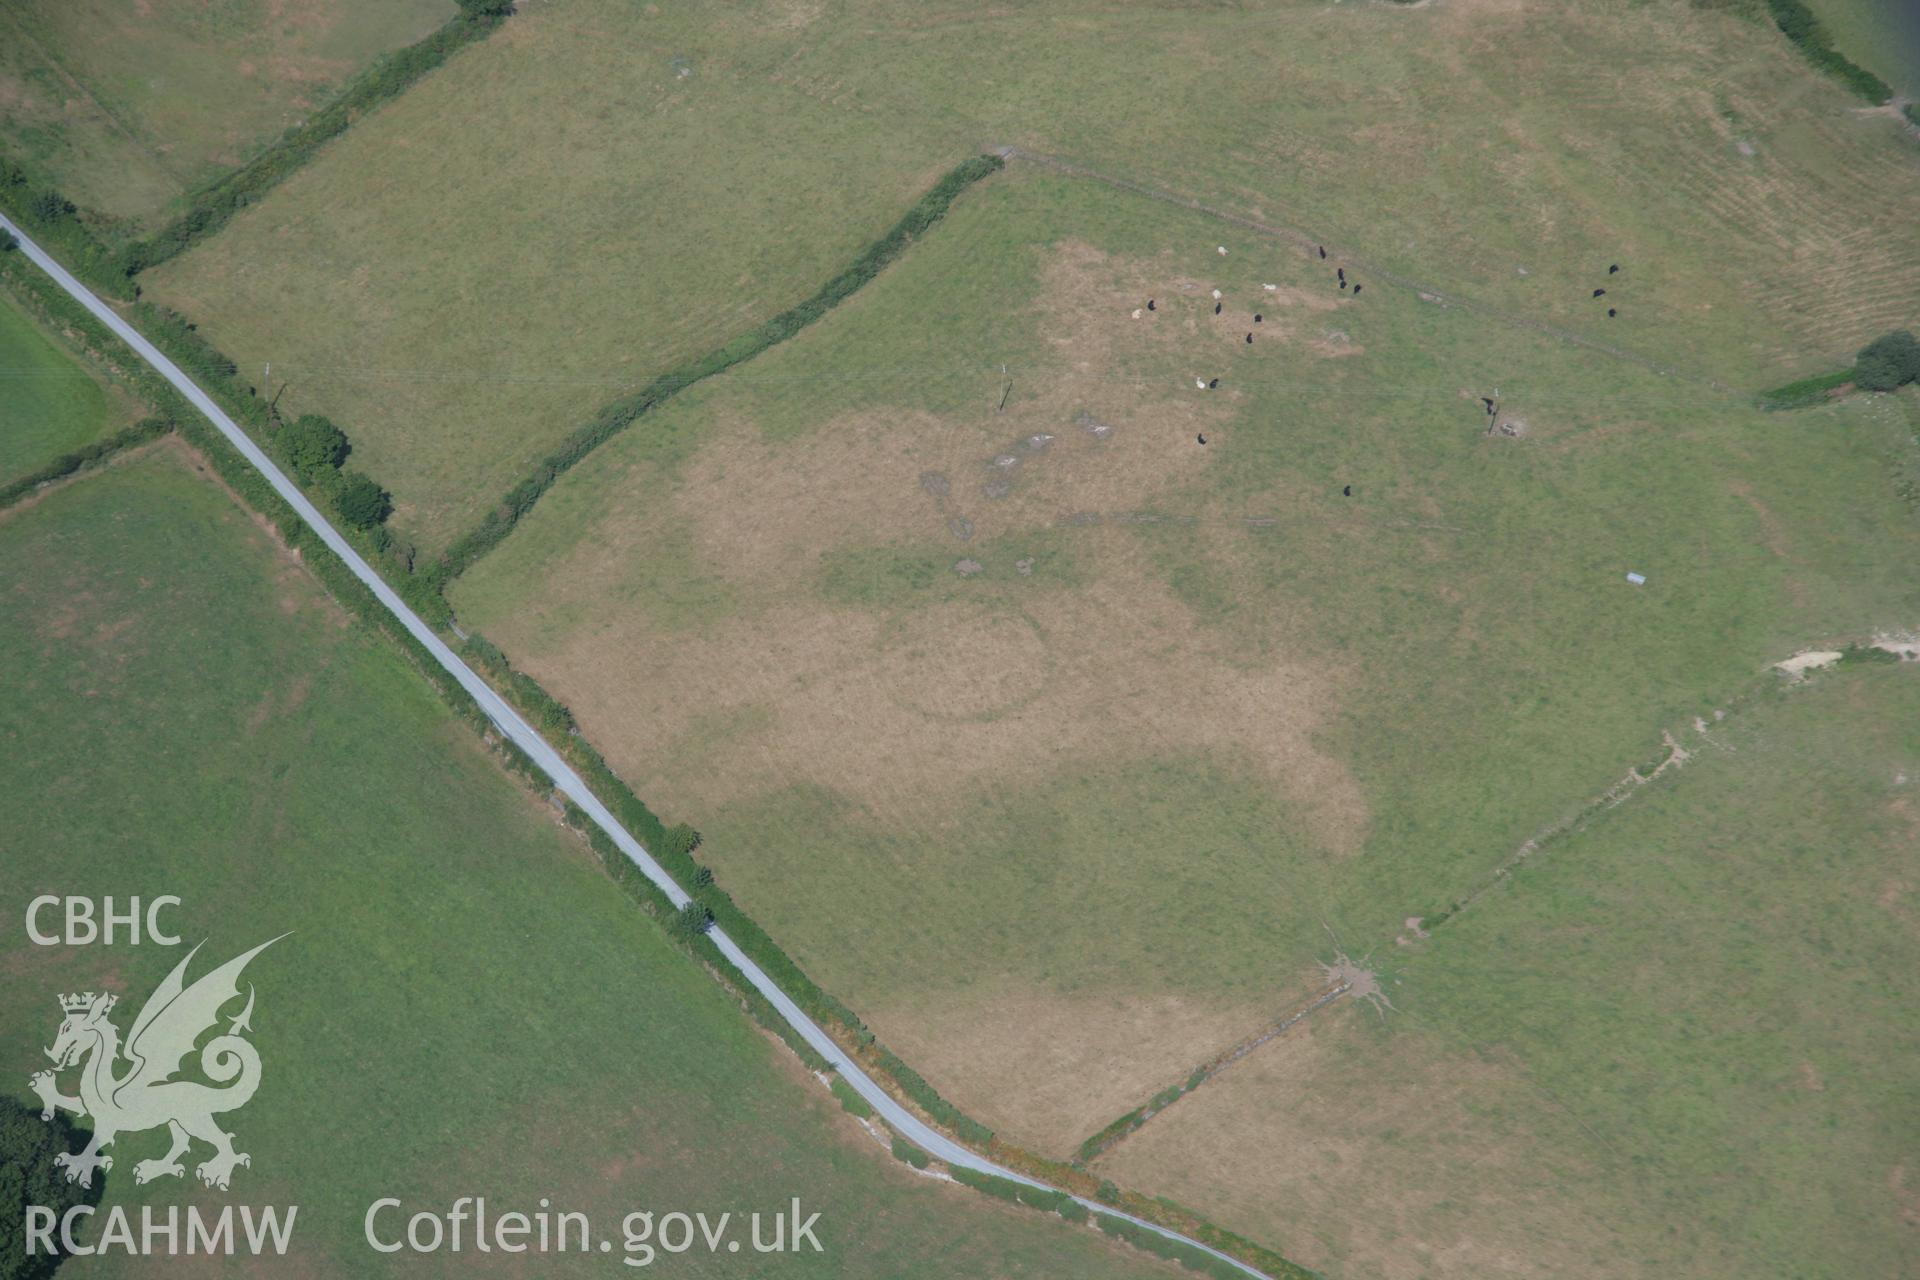 RCAHMW colour oblique aerial photograph of Penarth Fawr ring ditch.. Taken on 25 July 2006 by Toby Driver.